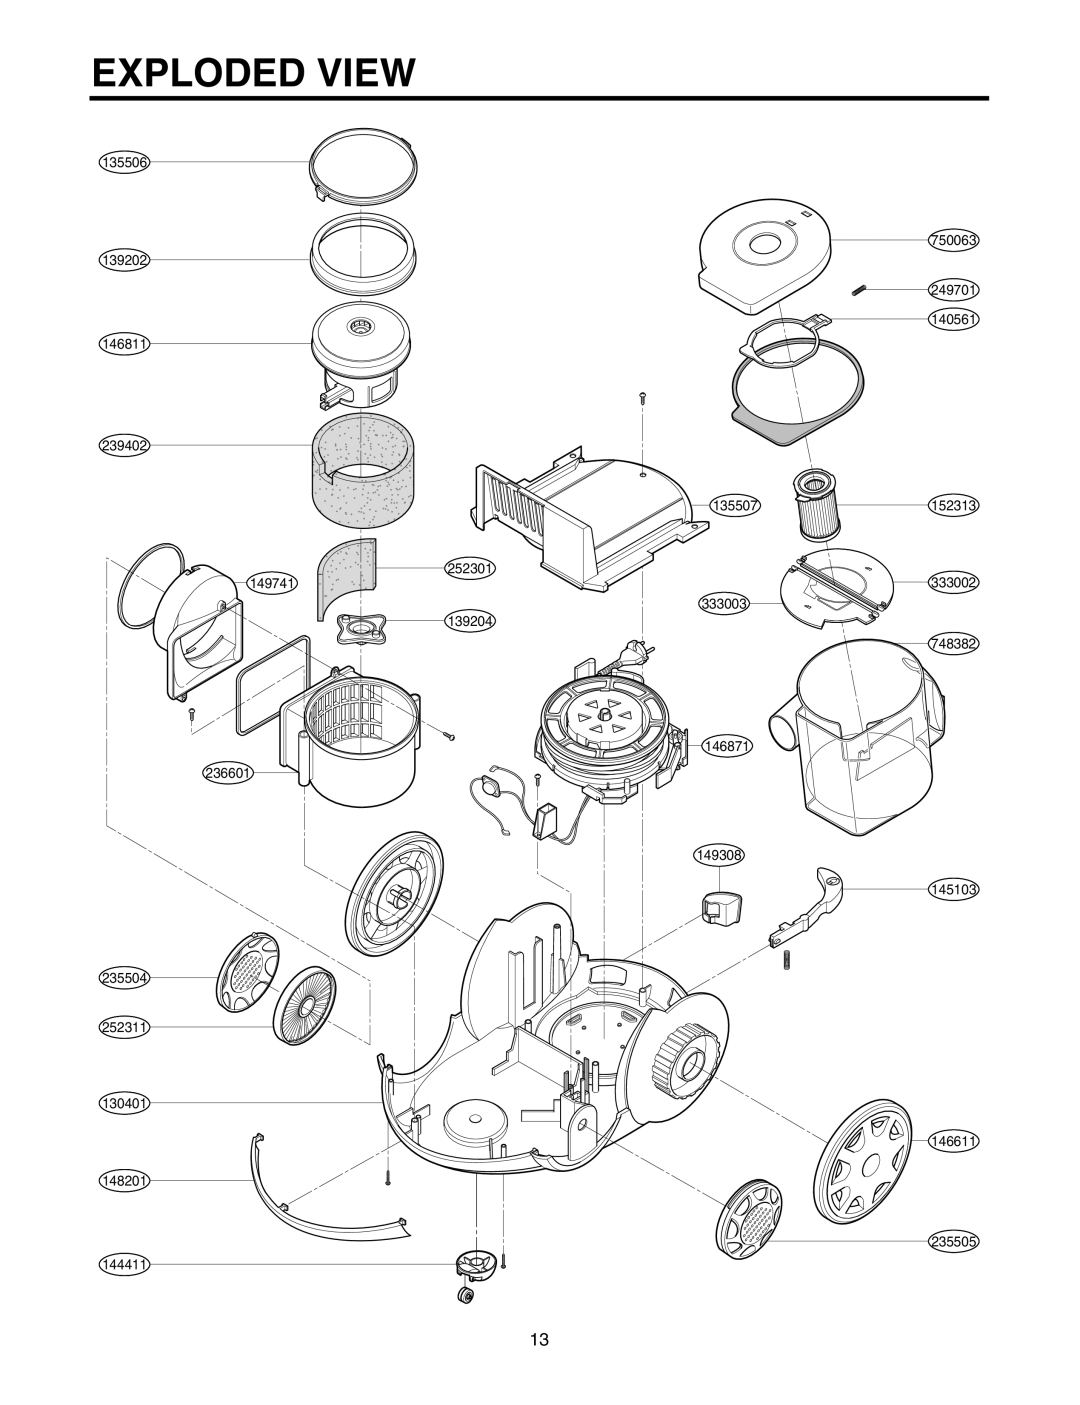 LG Electronics V-C7070CP, V-C7070CT, V-C7050HT, V-C7050NT service manual Exploded View, 135507 